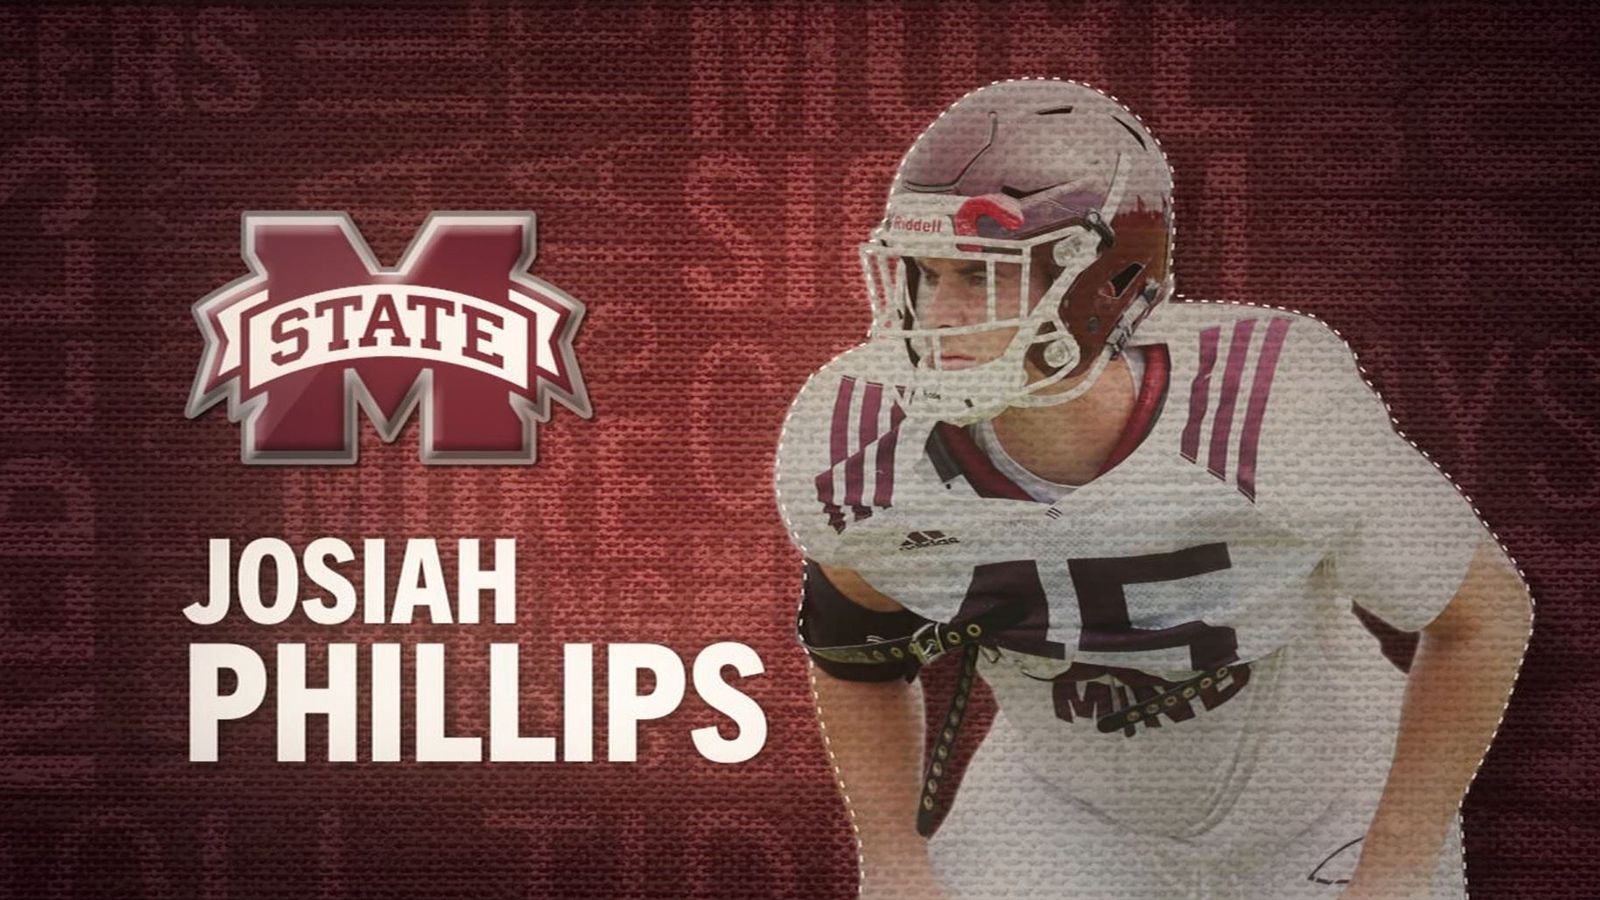 I am the SEC: Mississippi State's Josiah Phillips